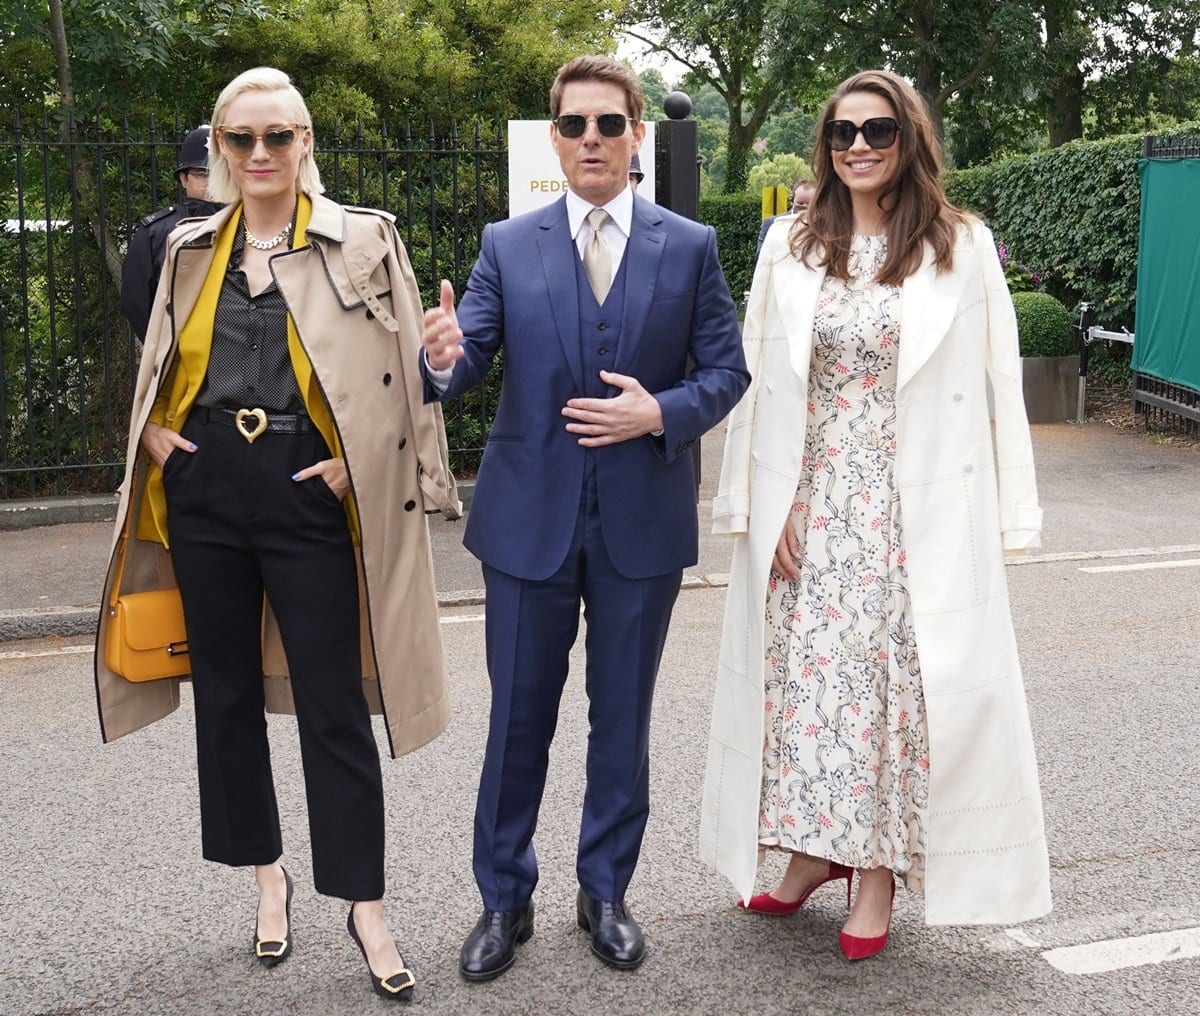 Pom Klementieff (L), Tom Cruise (C), and his then-girlfriend Hayley Atwell attend day 12 of the Wimbledon Tennis Championships